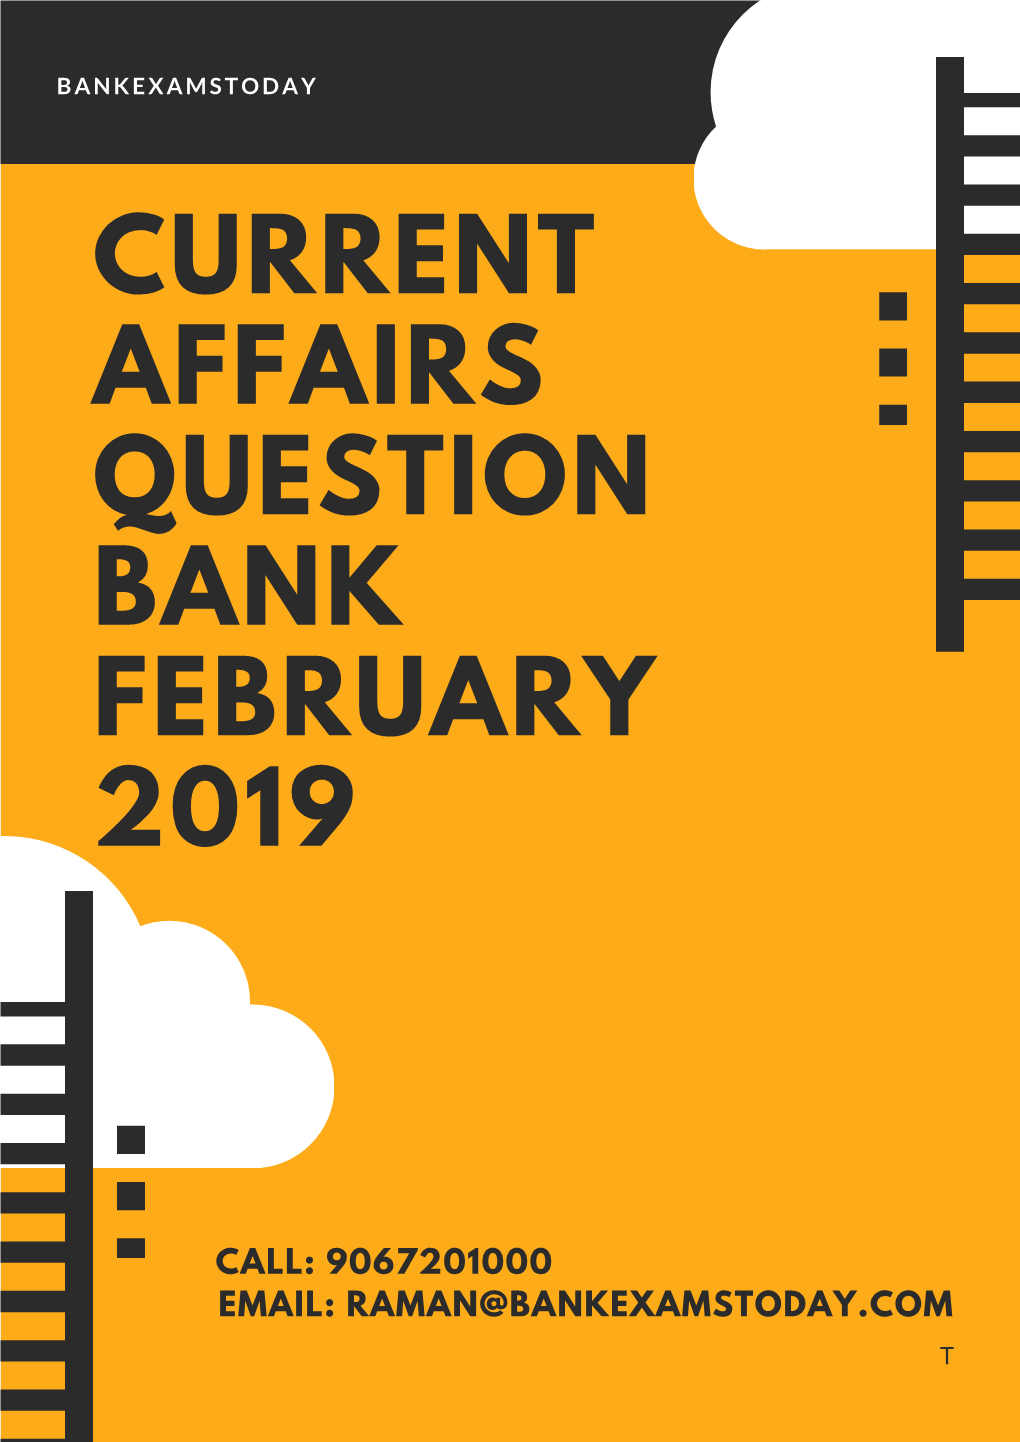 Current Affairs Question Bank February 2019